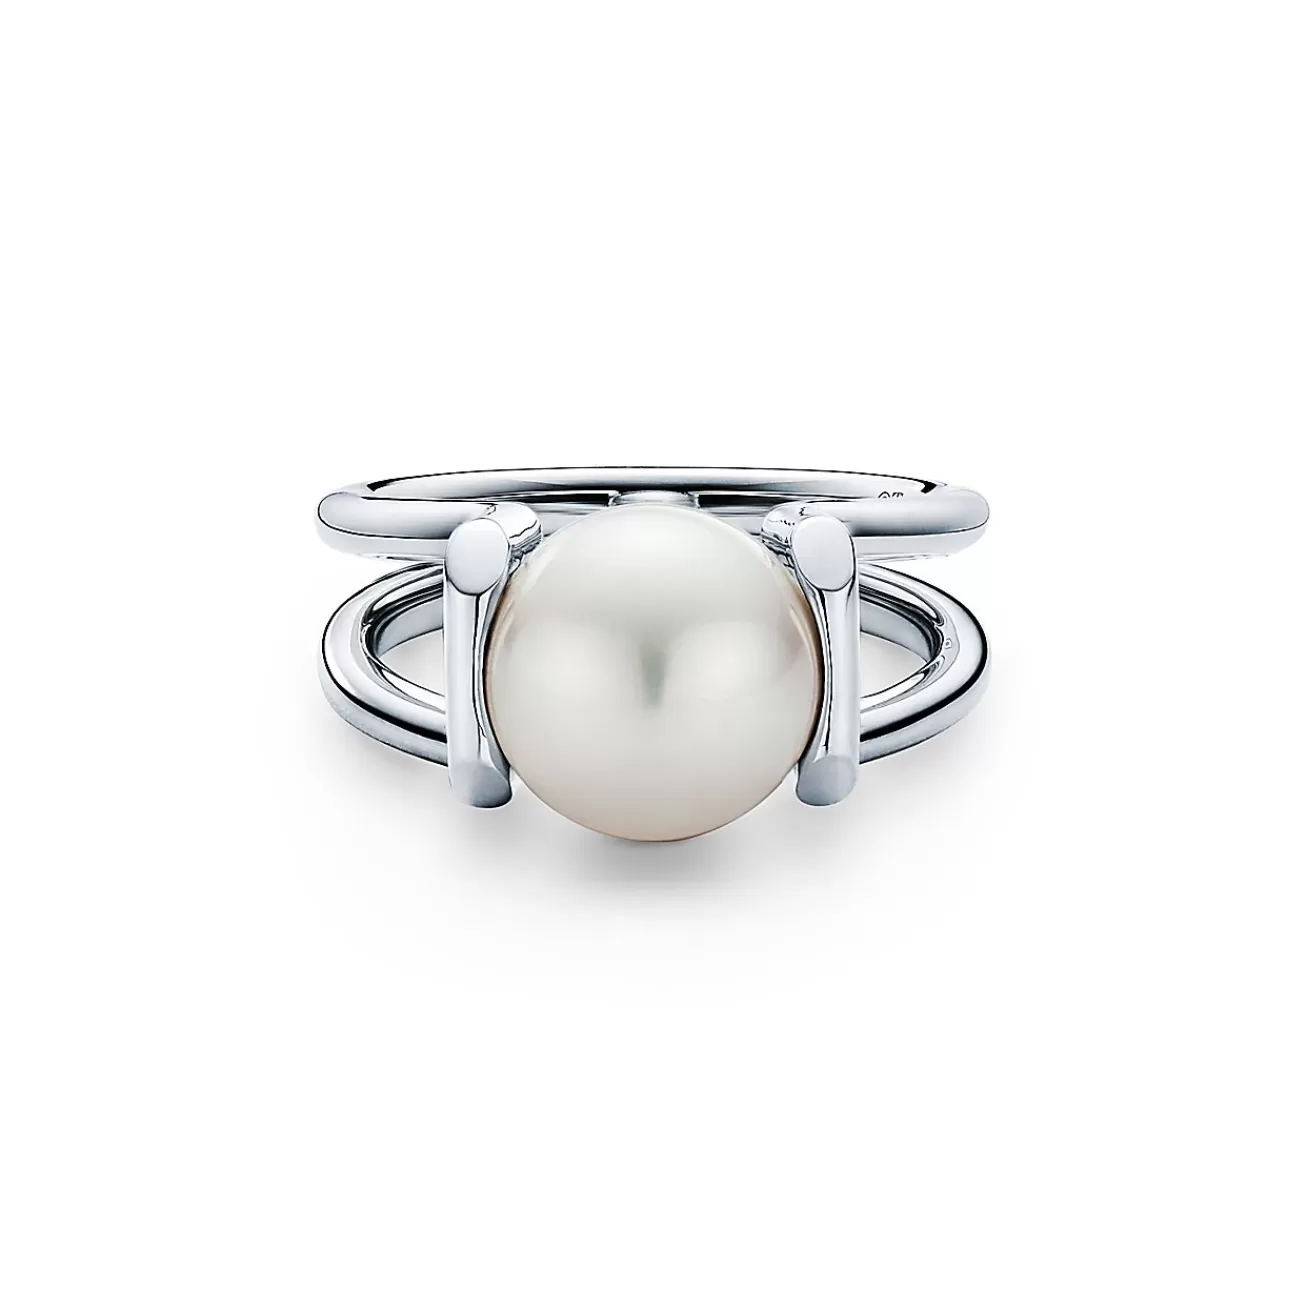 Tiffany & Co. Tiffany HardWear freshwater pearl ring in sterling silver. | ^ Rings | Gifts for Her